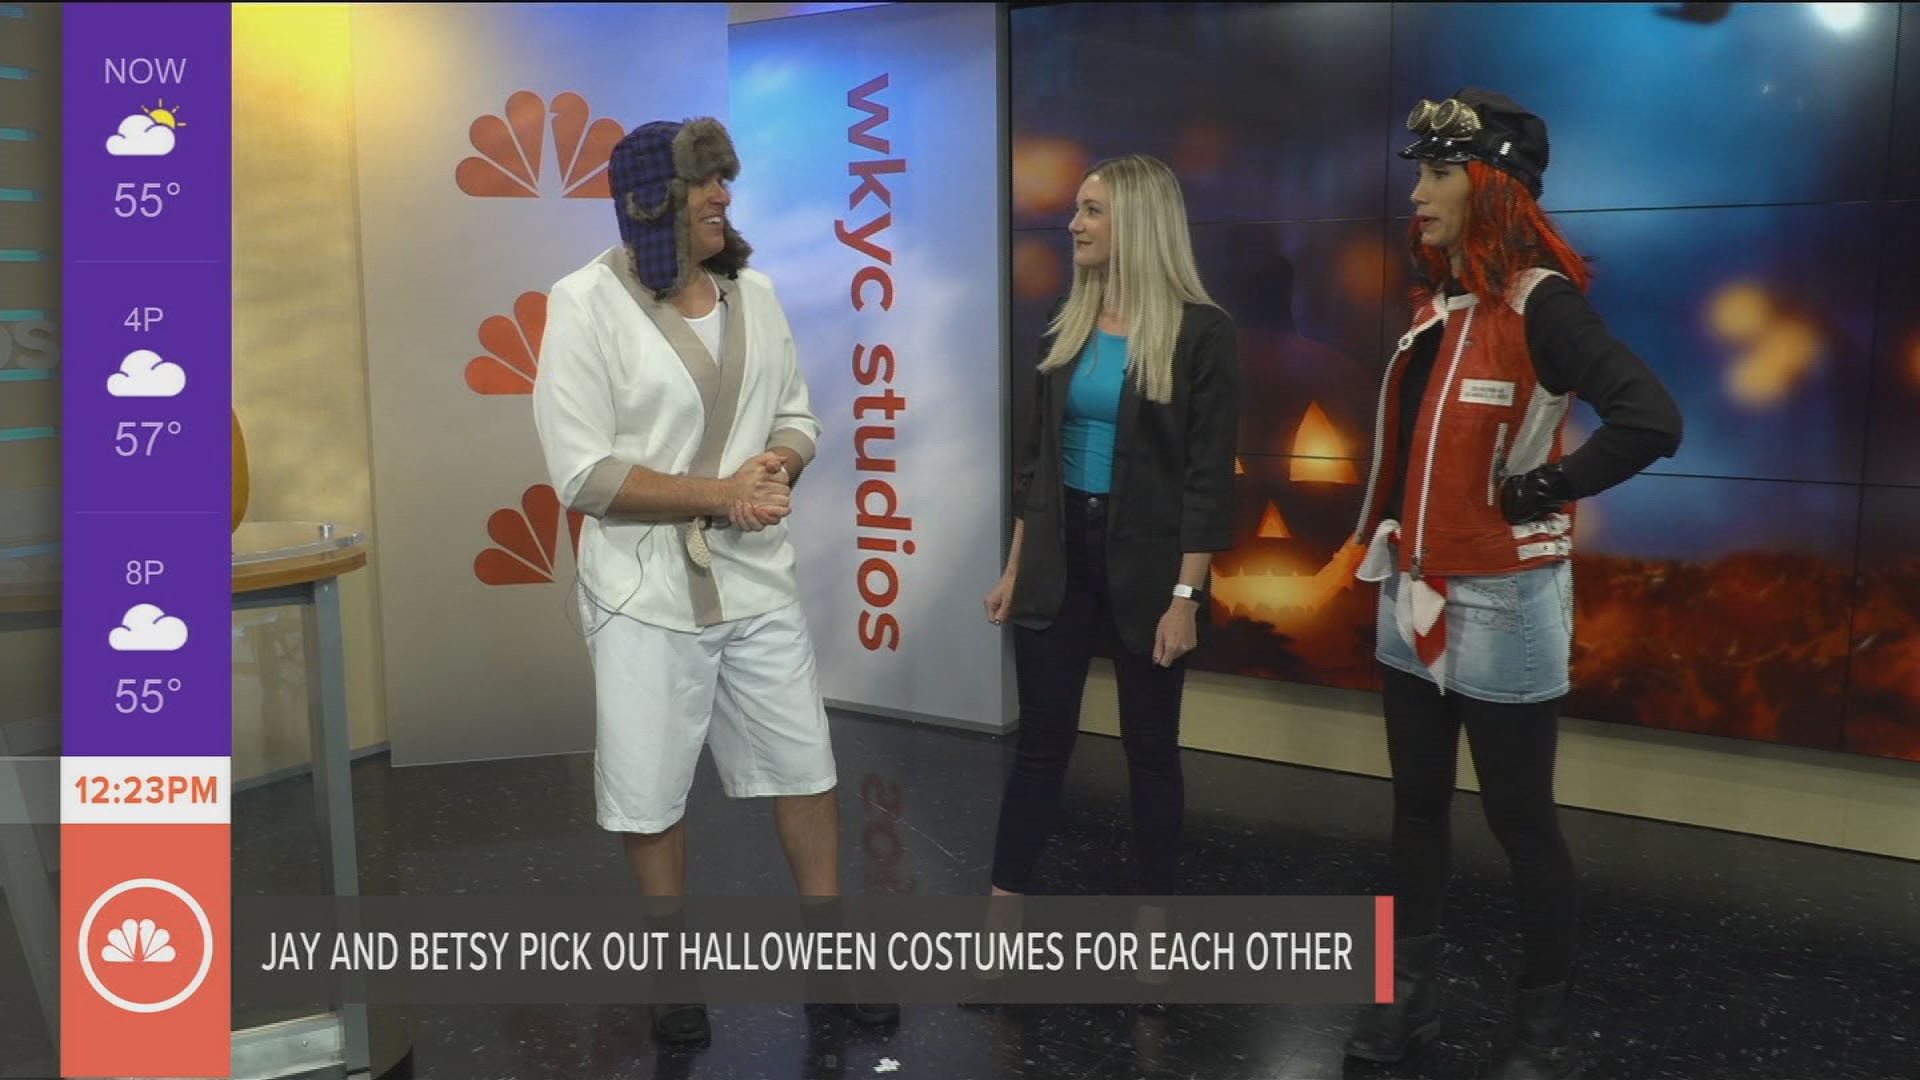 Jay is dressed as Cousin Eddie from National Lampoon's Christmas Vacation and Betsy is dressed a biker chick.